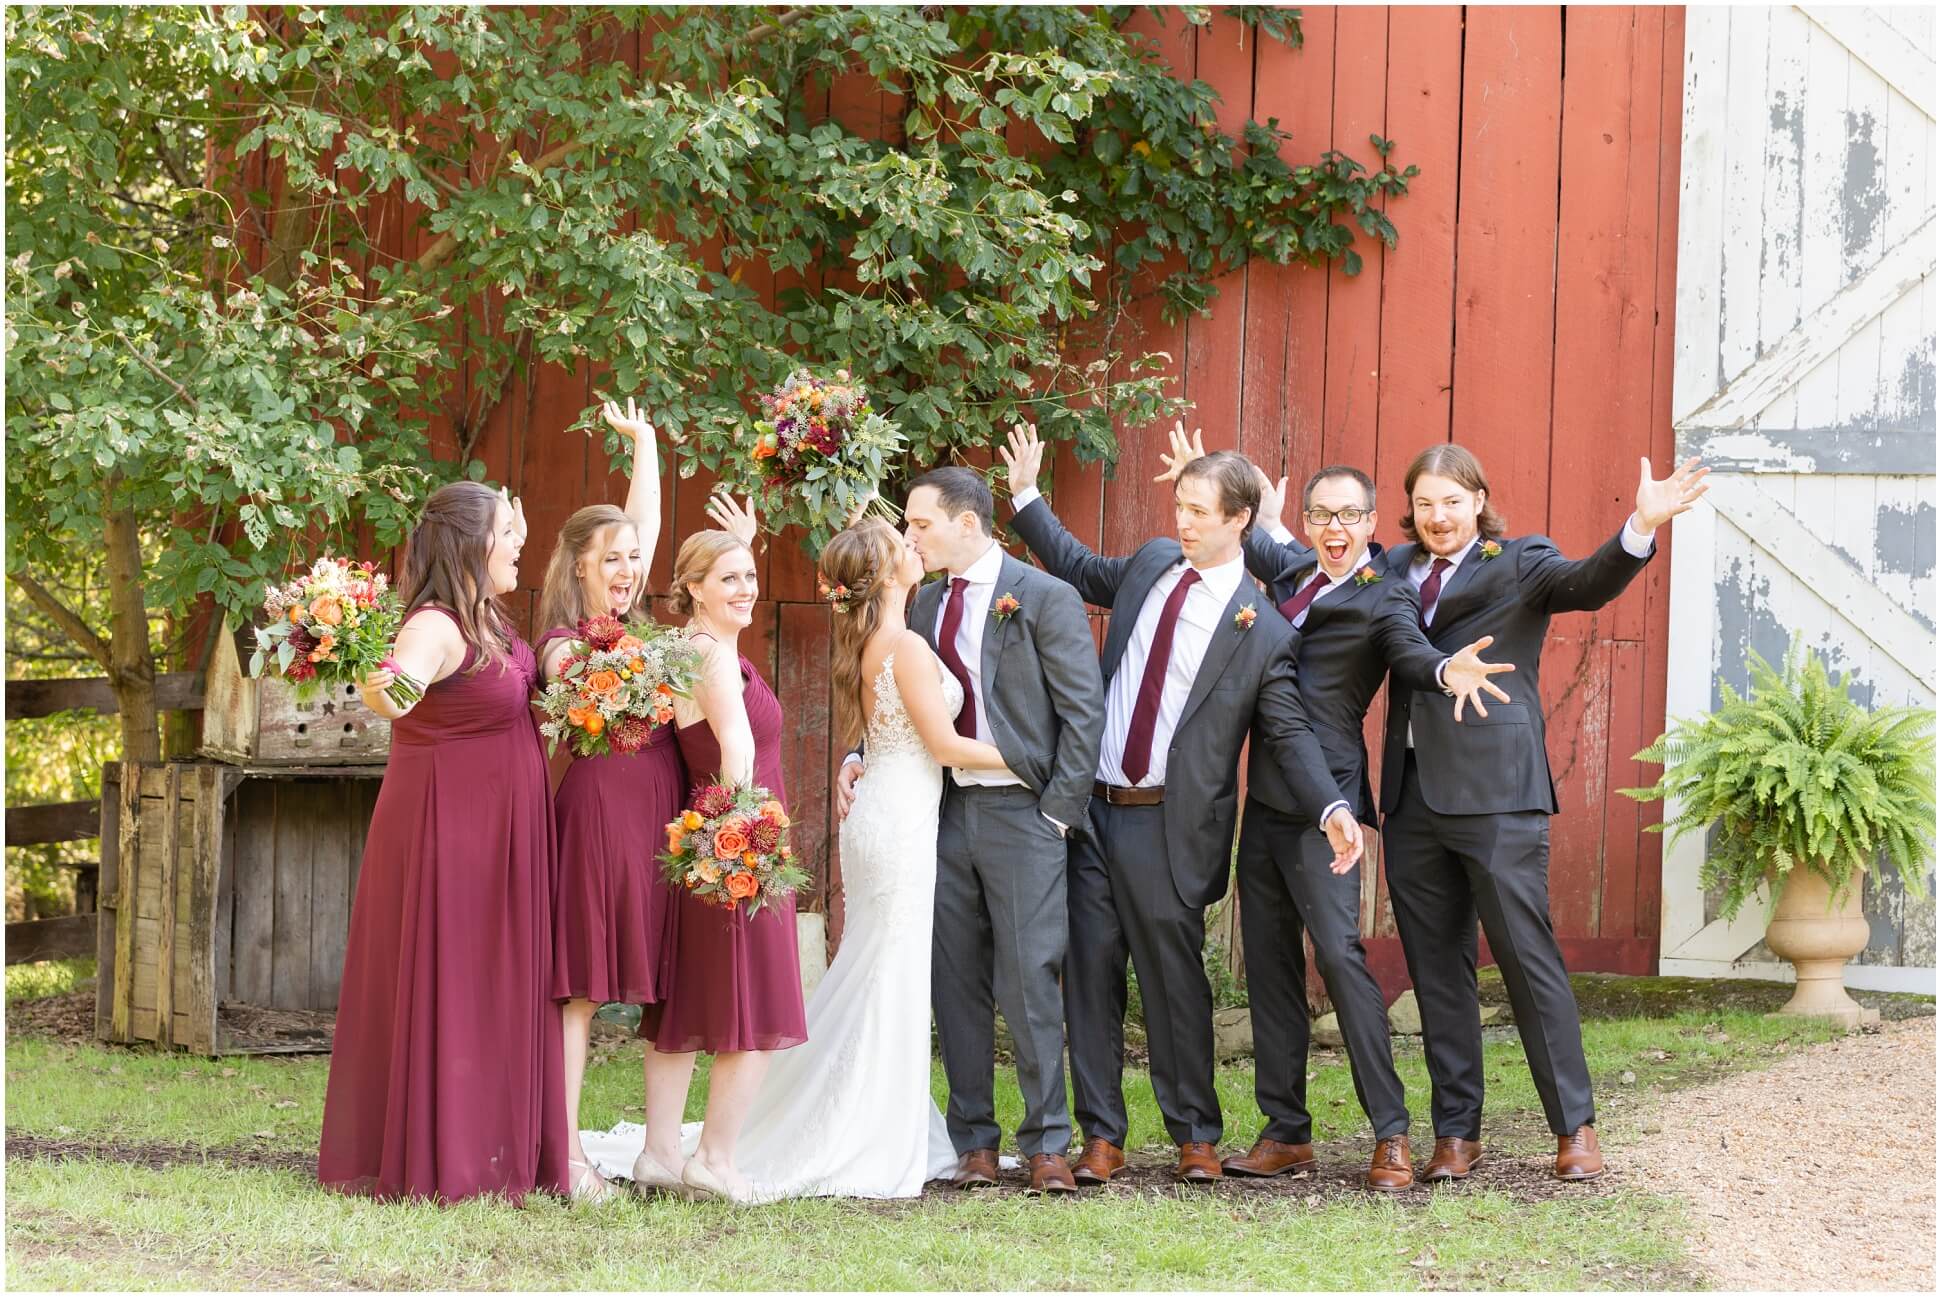 FULL BRIDAL PARTY IN FRONT OF THE BARN